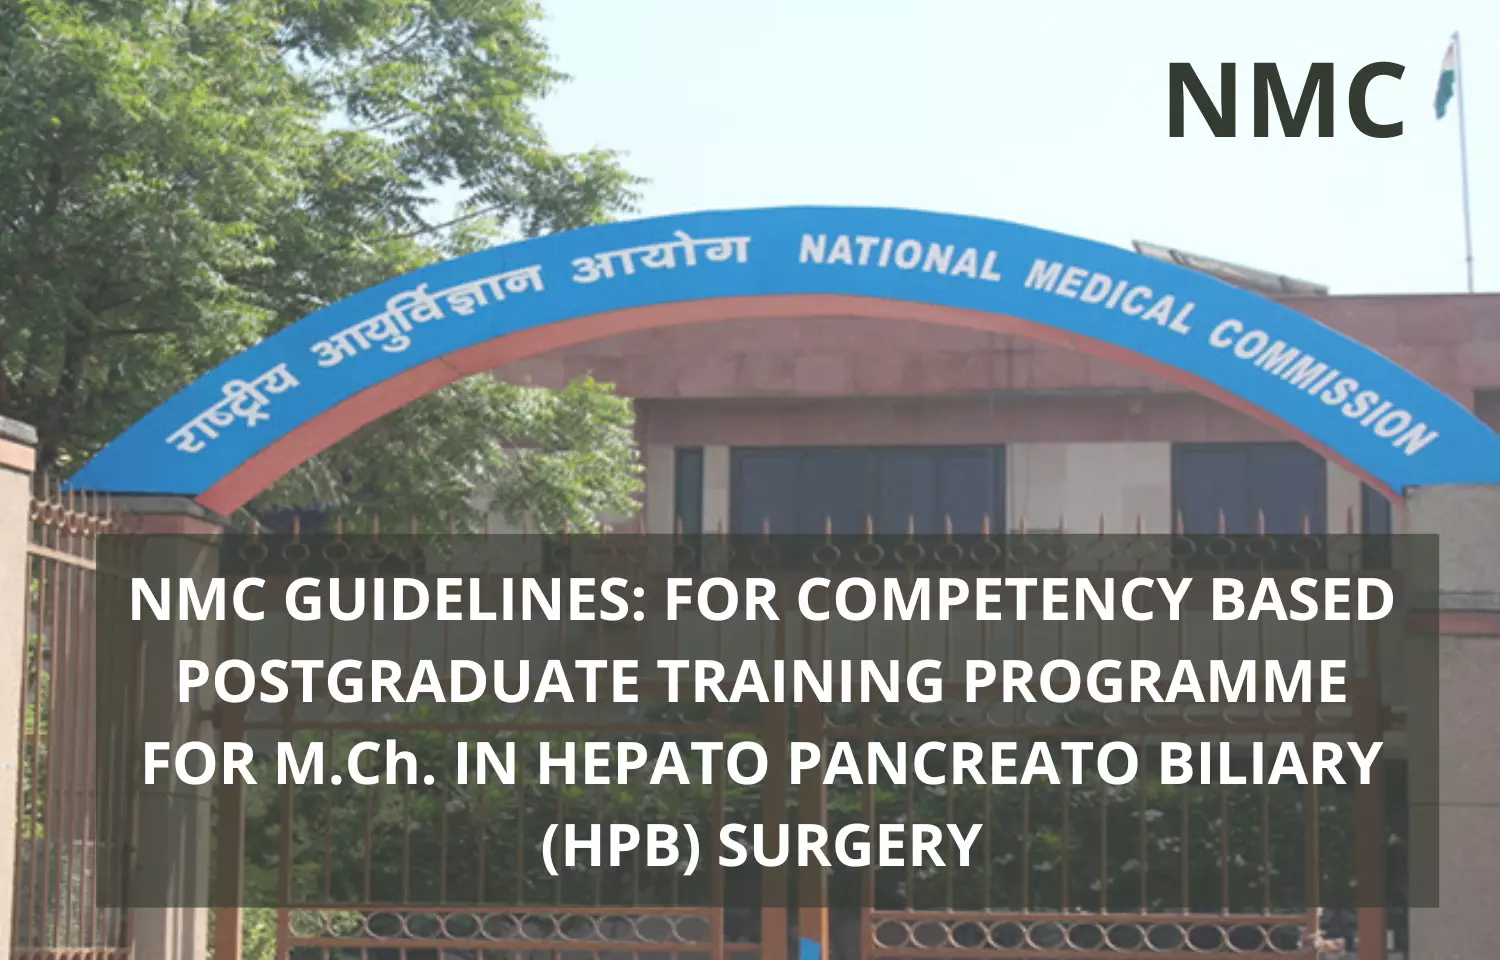 NMC Guidelines For Competency-Based Training Programme For MCh Hepato Pancreato Biliary (HPB) Surgery